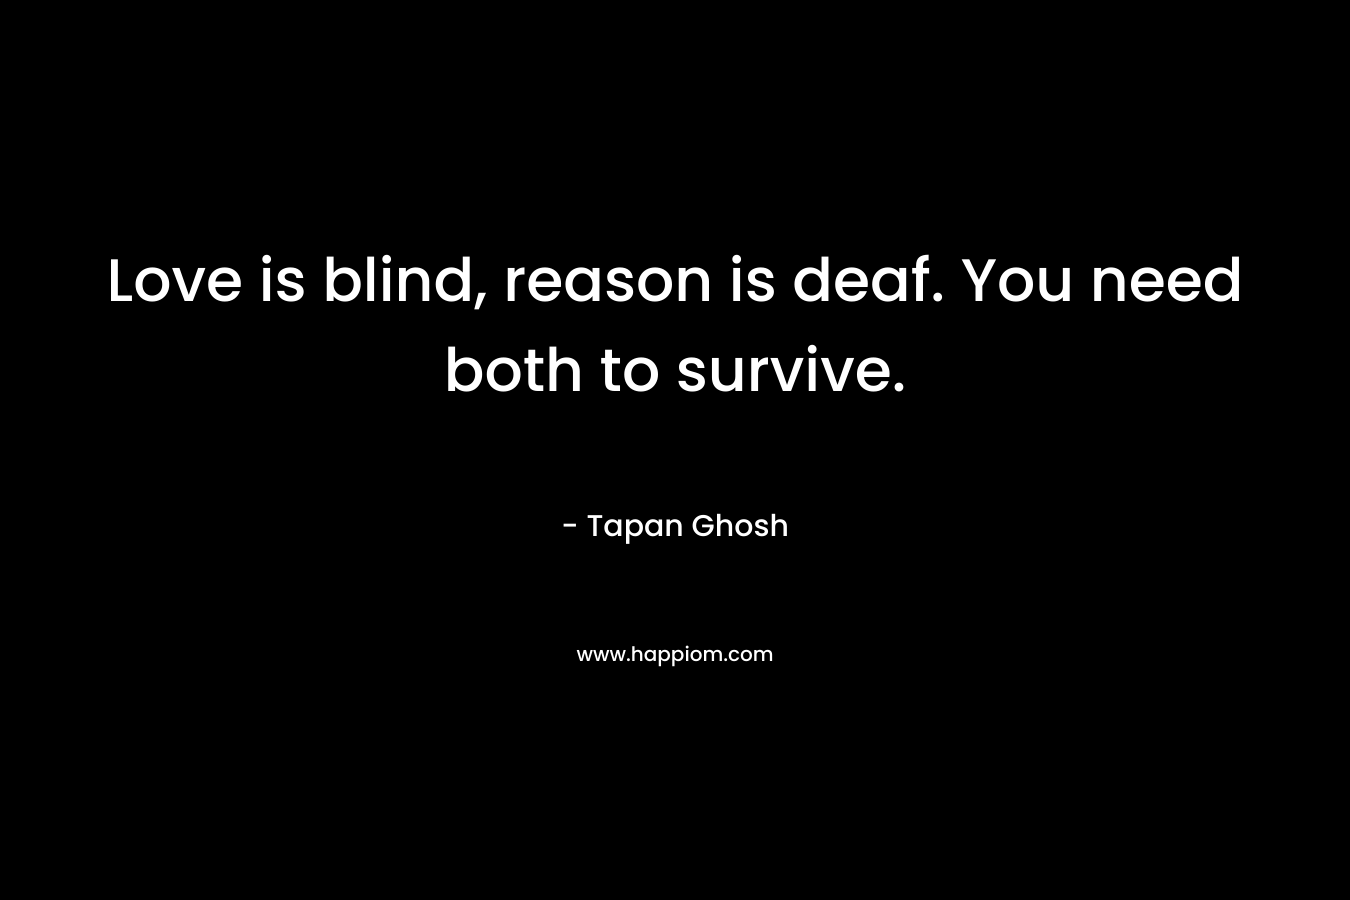 Love is blind, reason is deaf. You need both to survive.